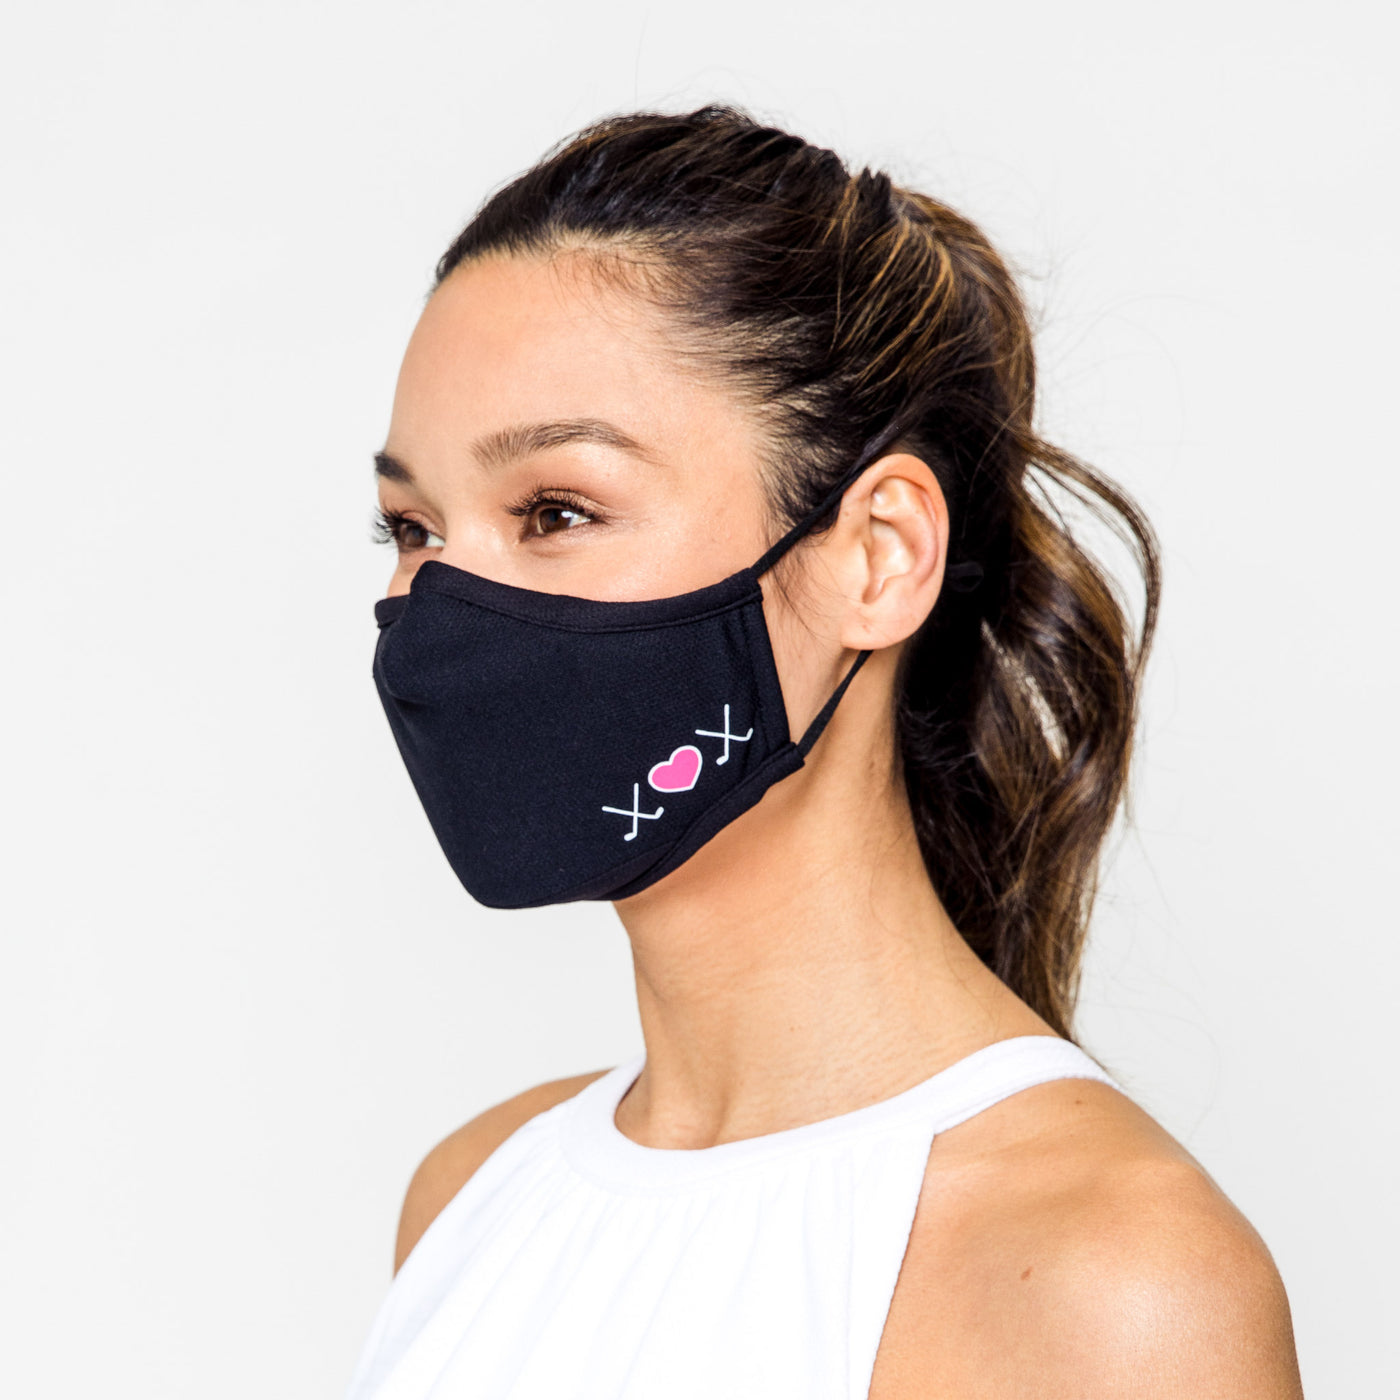 woman wearing black face mask with white and pink crossed golf clubs and heart printed on one side